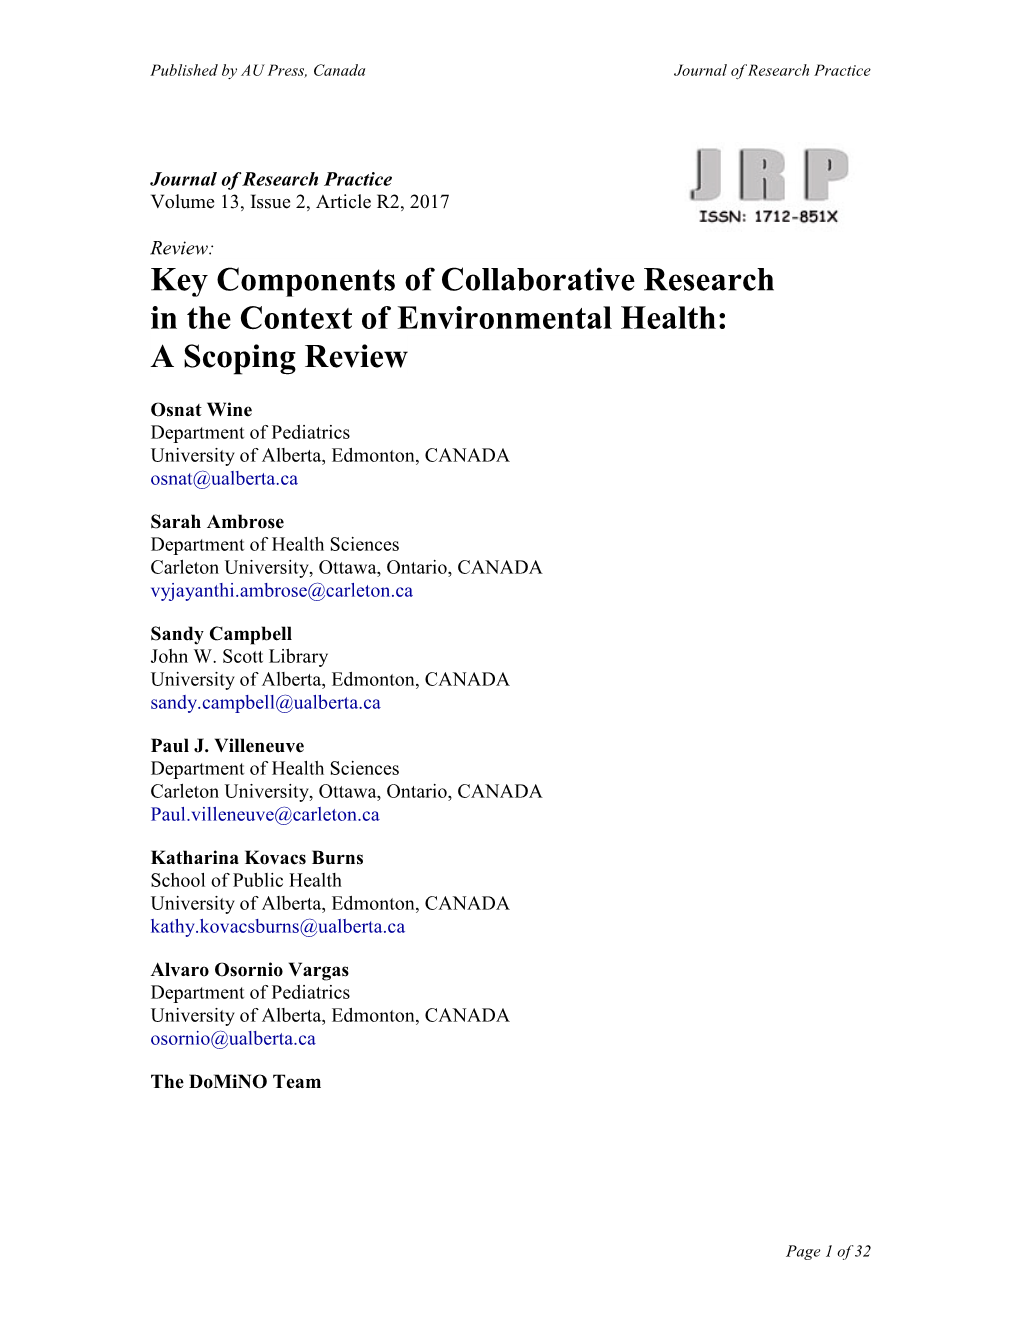 Key Components of Collaborative Research in the Context of Environmental Health: a Scoping Review